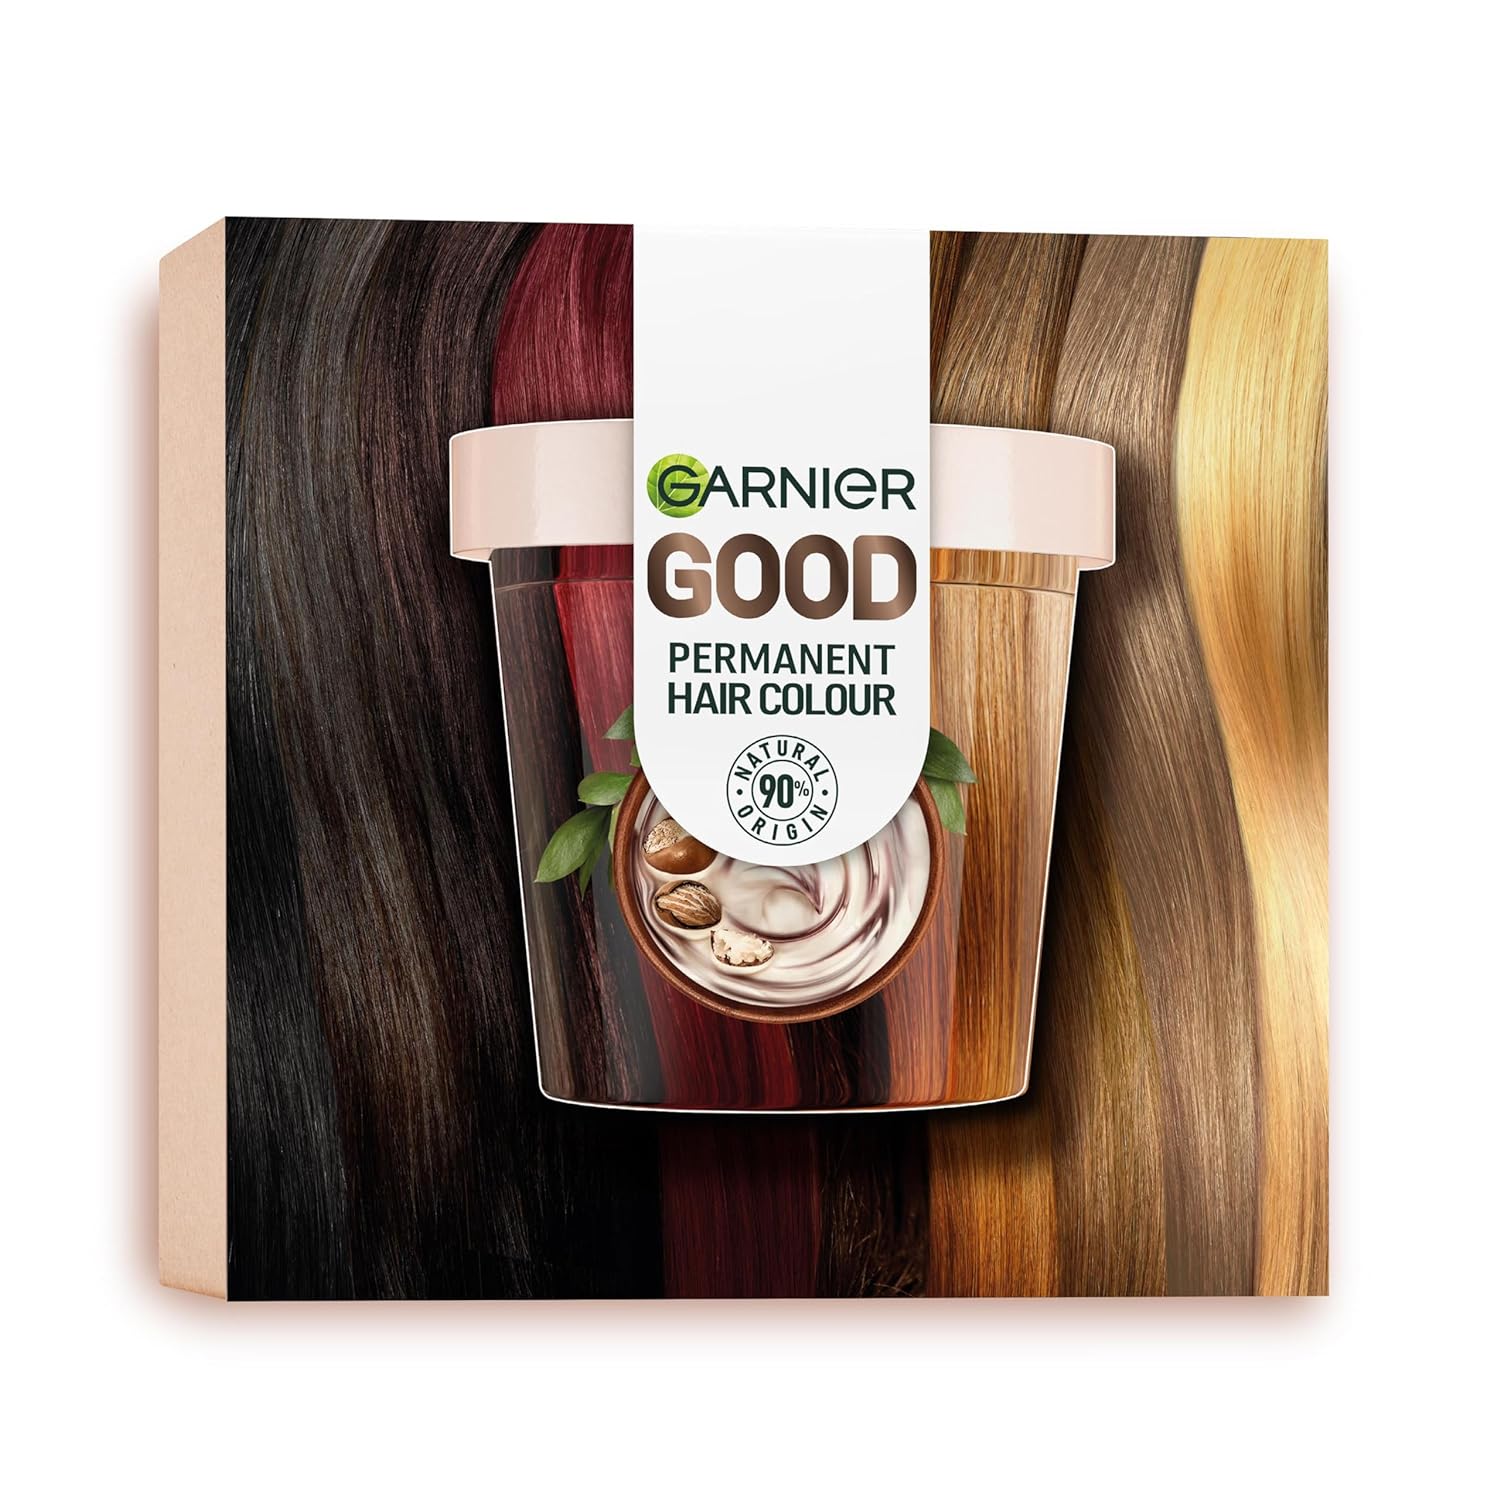 Garnier Permanent Hair Colour, Hair Dye Set for Intense and Long-Lasting Hair Colour, Colouration for up to 8 Weeks of Radiant Colour, No Ammonia, 8.0 Honey Blonde, Good Refill Kit